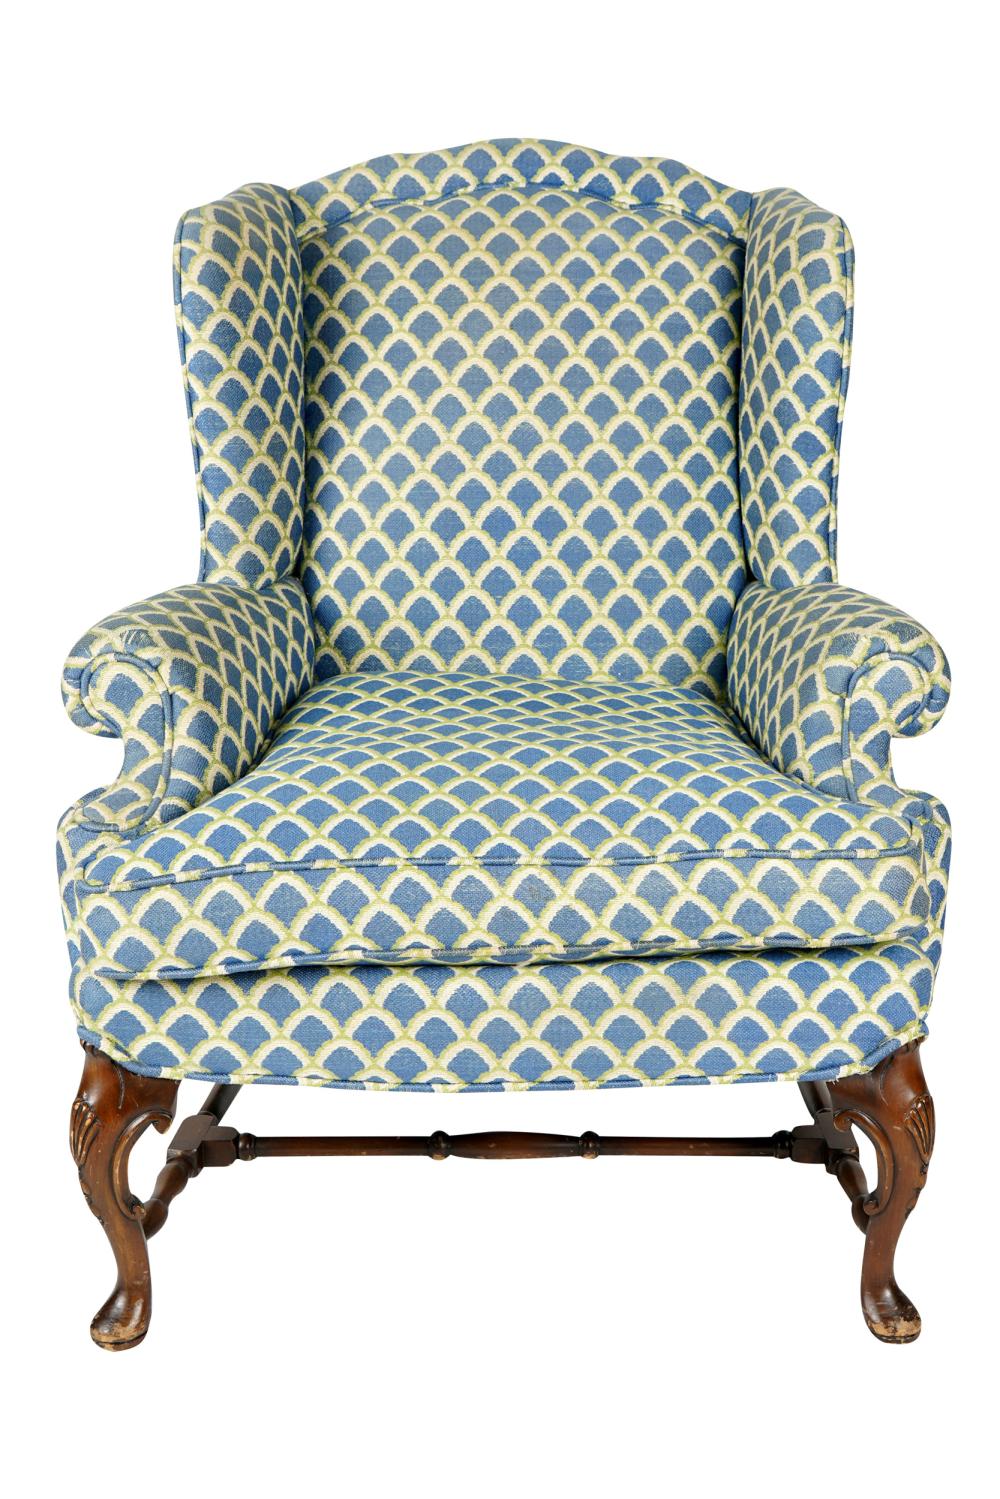 QUEEN ANNE STYLE ARMCHAIRcovered